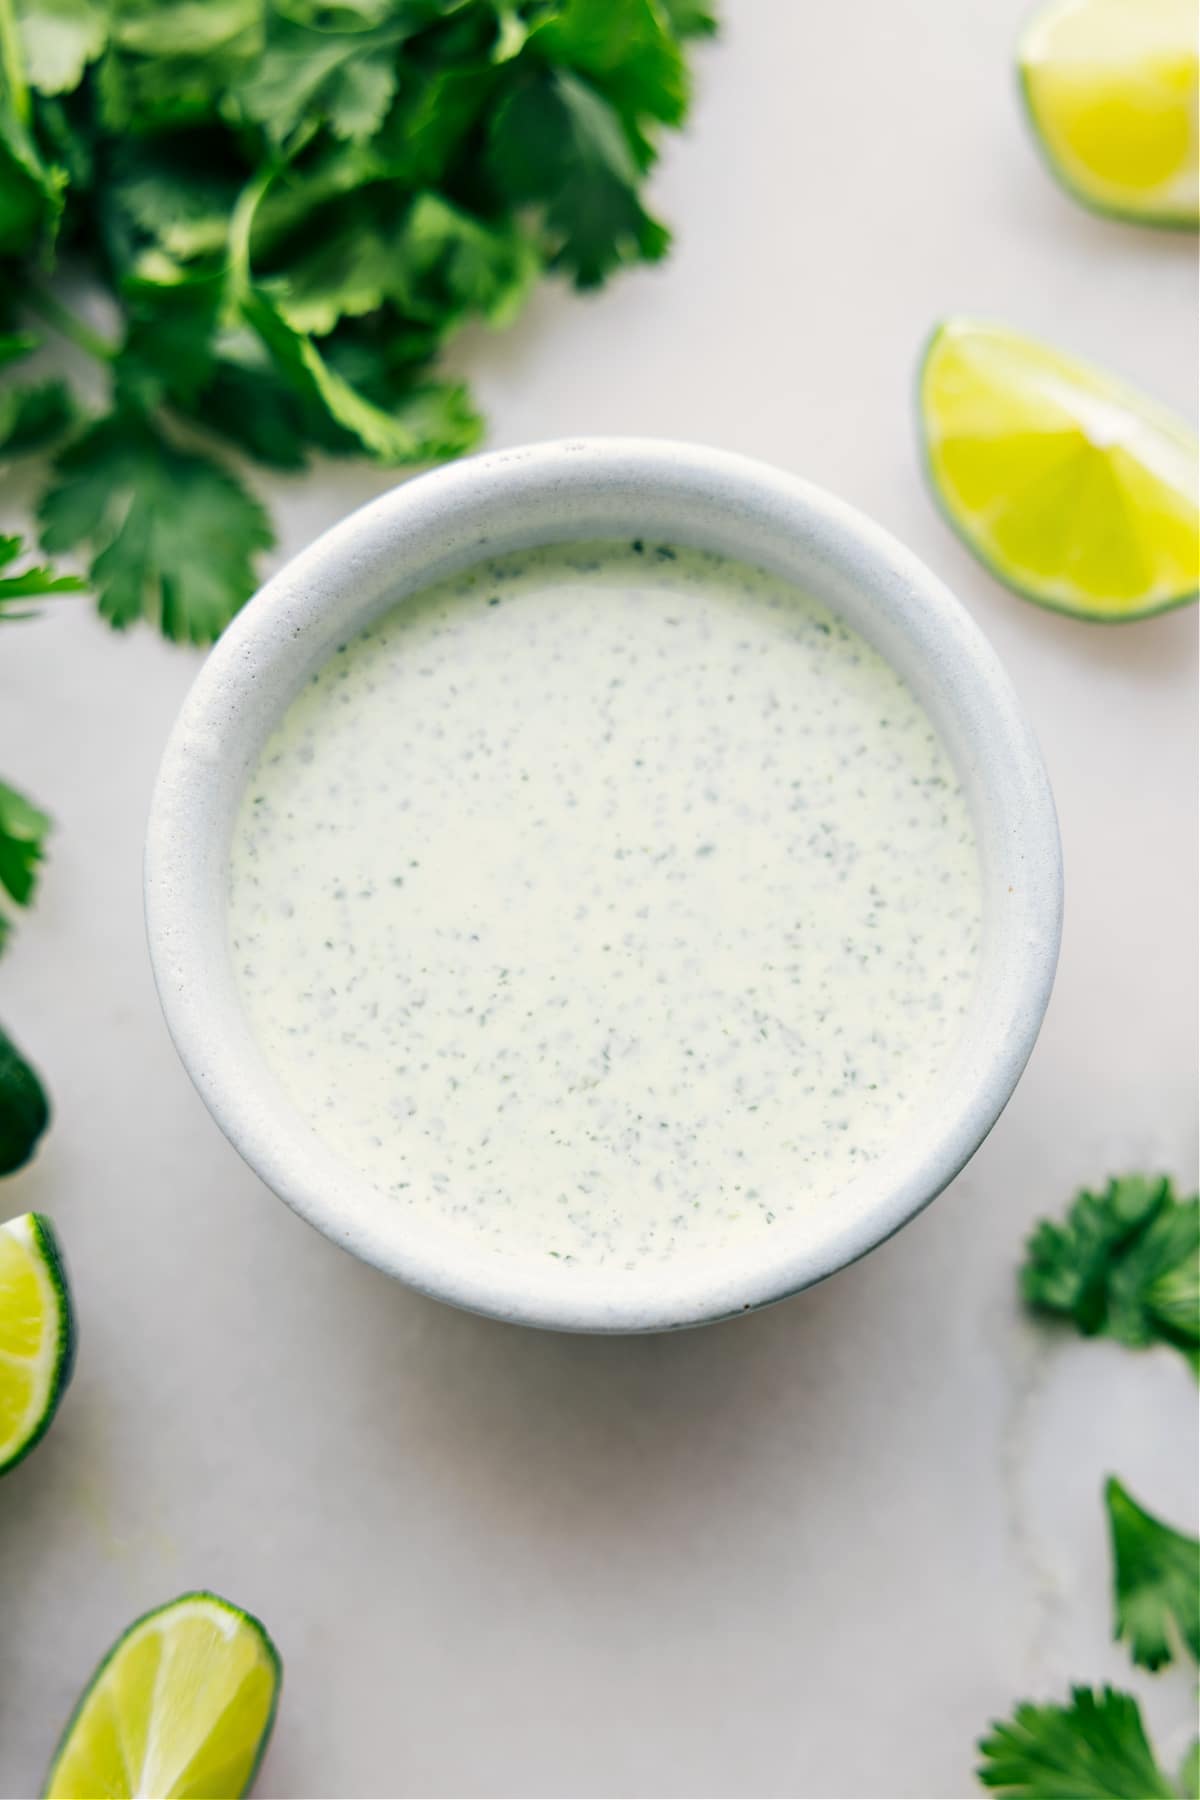 The cilantro lime sauce in a bowl ready to be enjoyed.